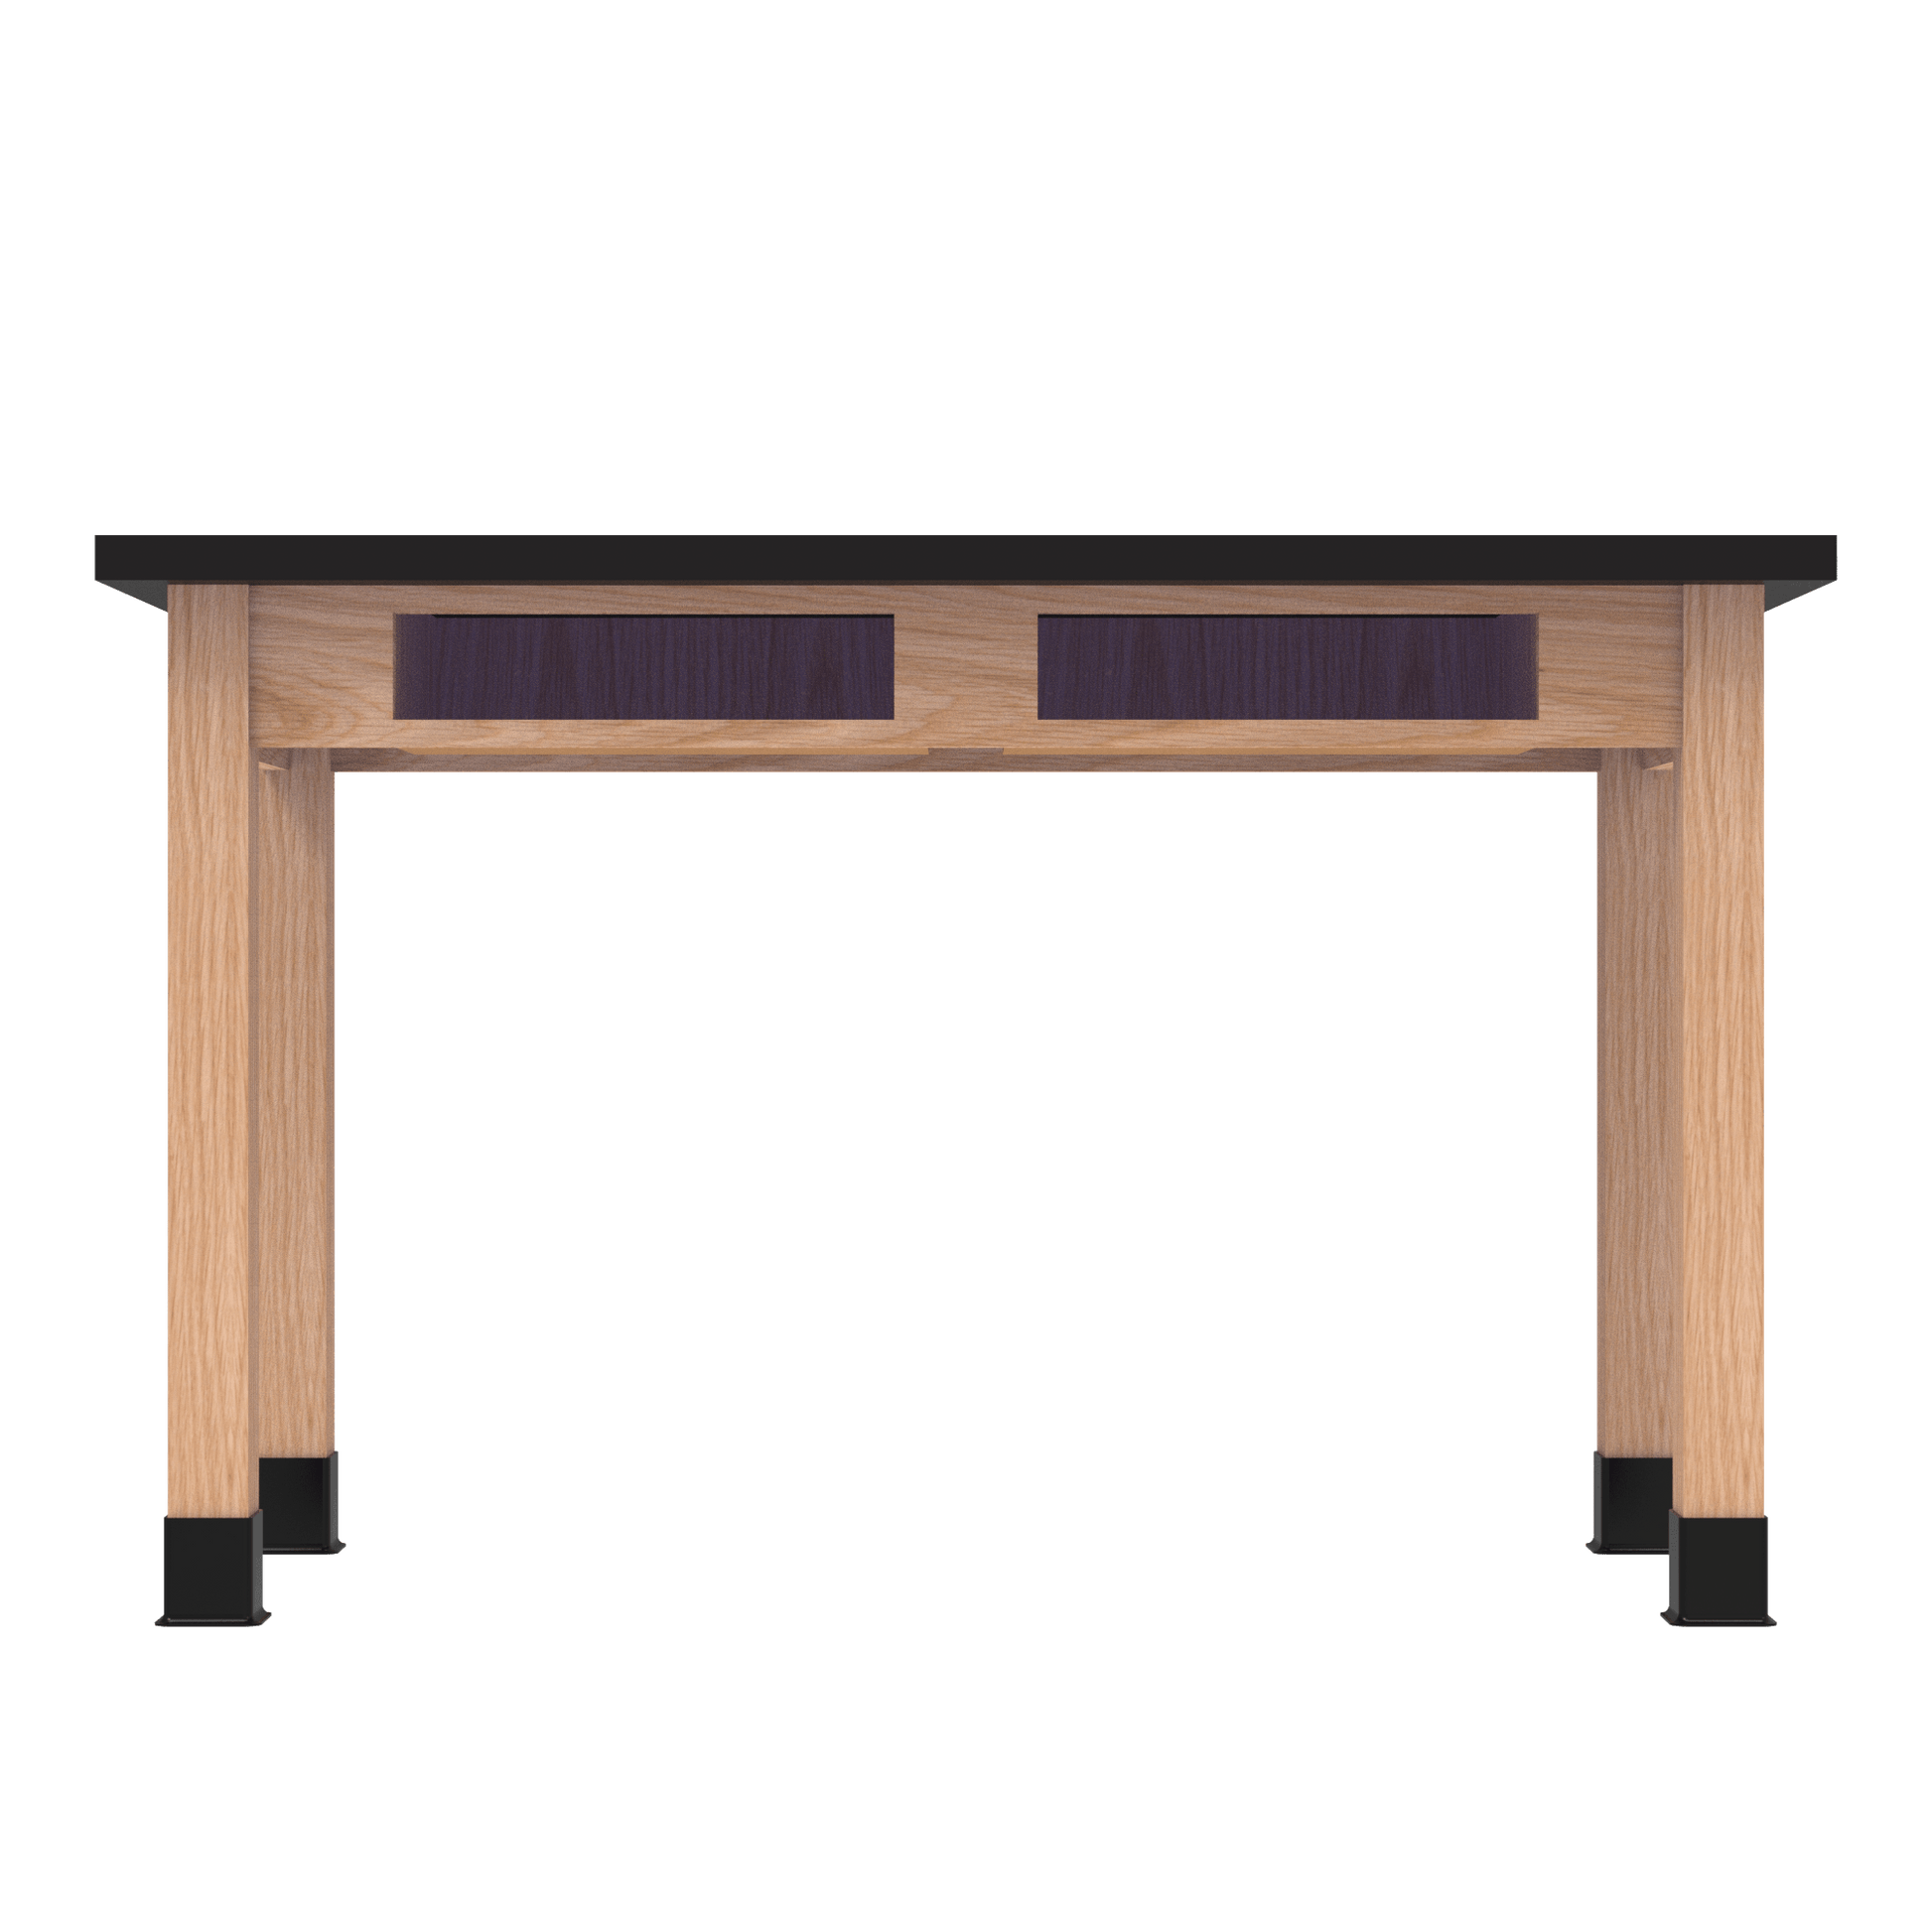 Diversified Woodcrafts Science Table w/ Book Compartment - 54" W x 42" D - Solid Oak Frame and Adjustable Glides - SchoolOutlet